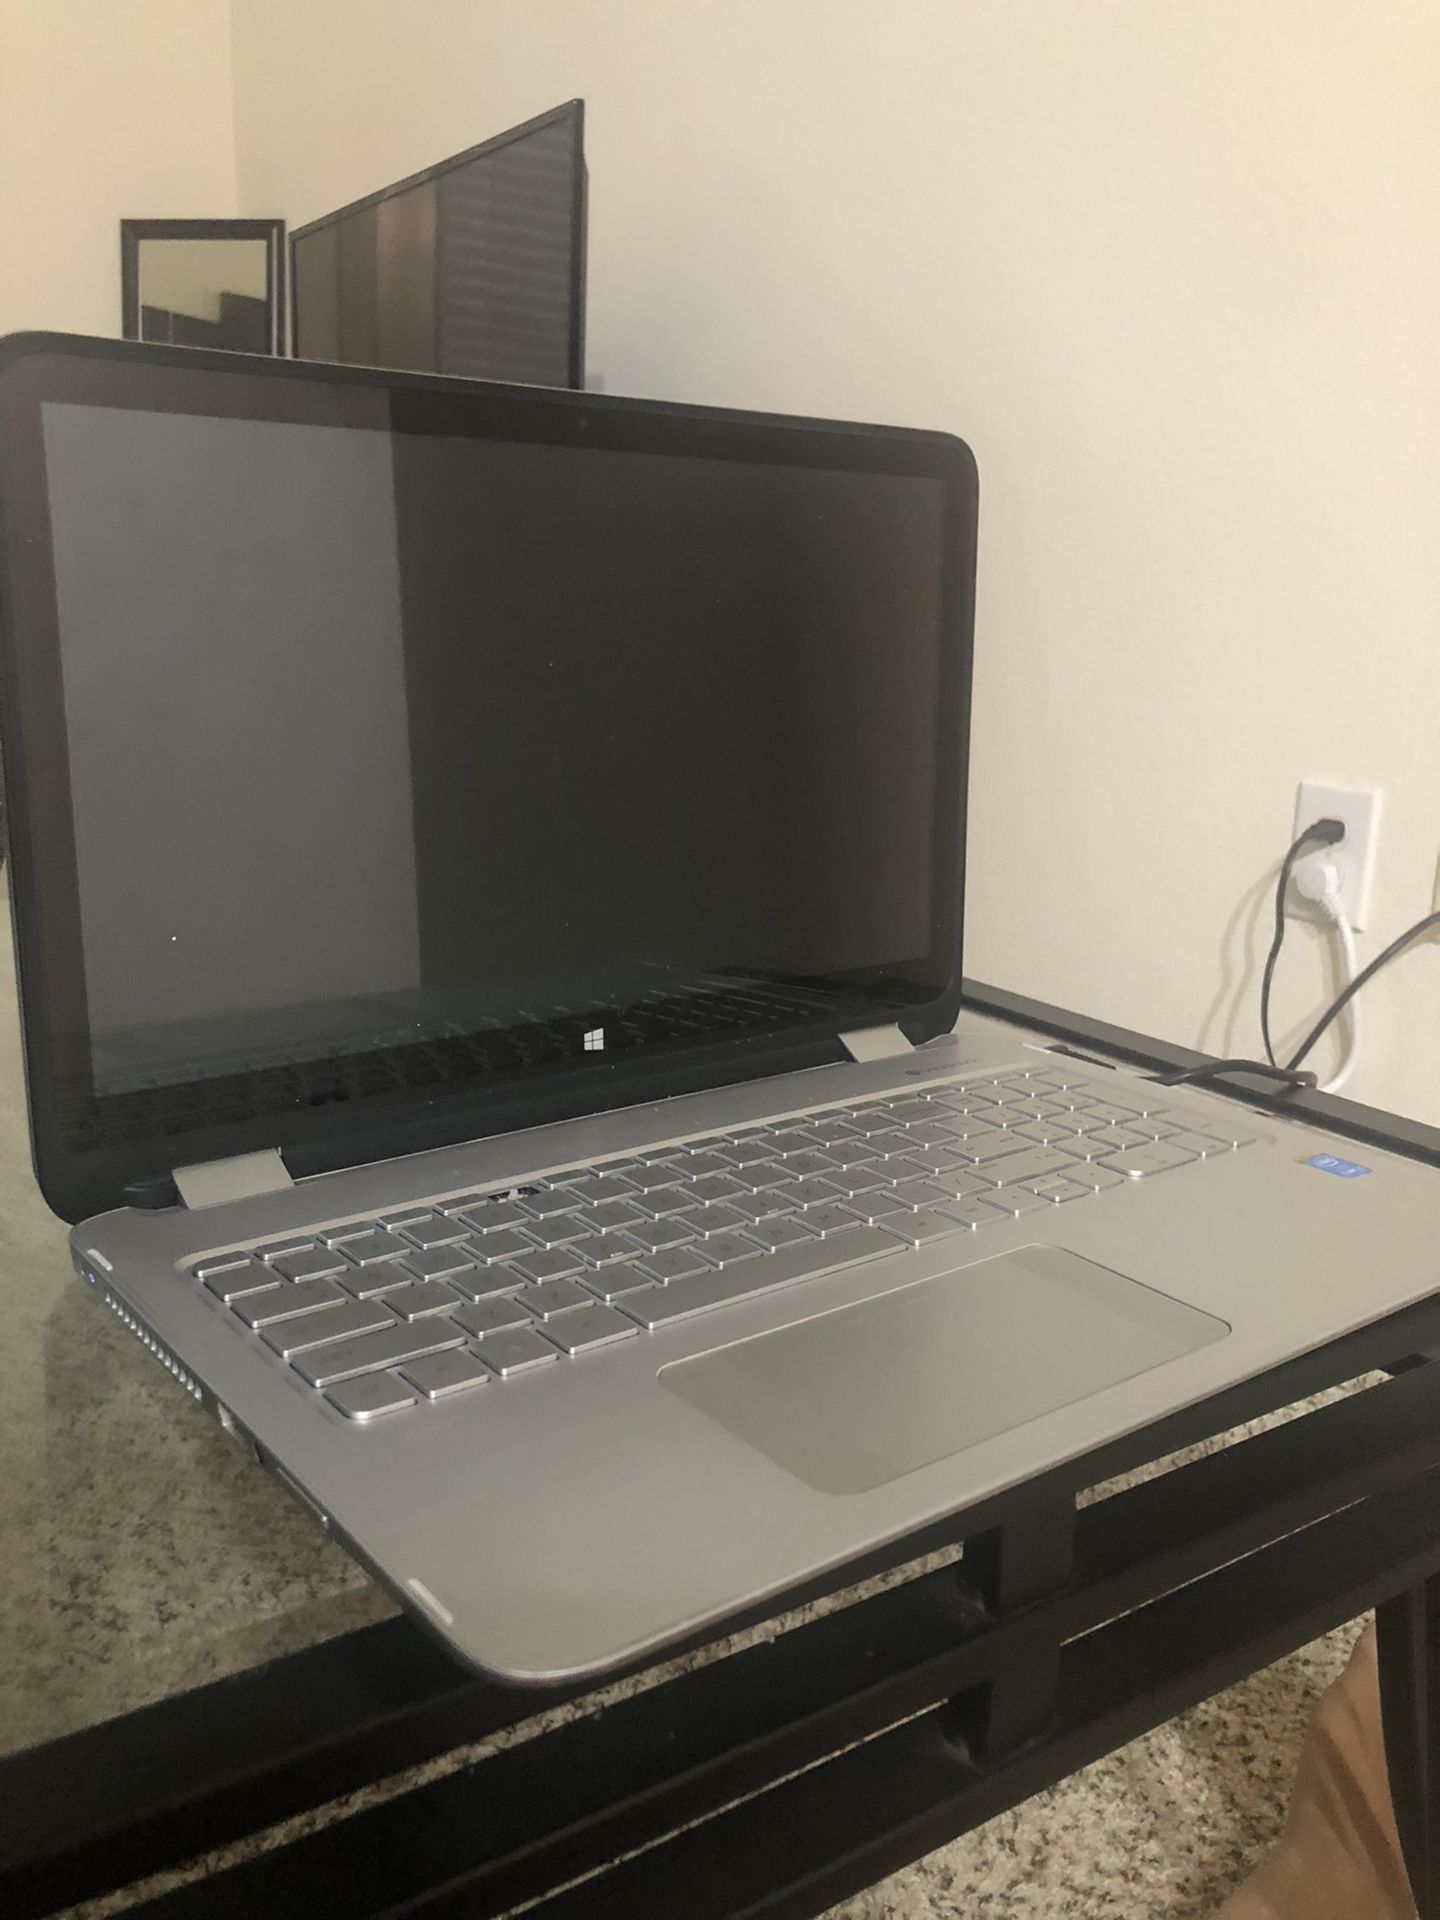 15.6" Touchscreen HP Laptop (that also turns into a tablet)